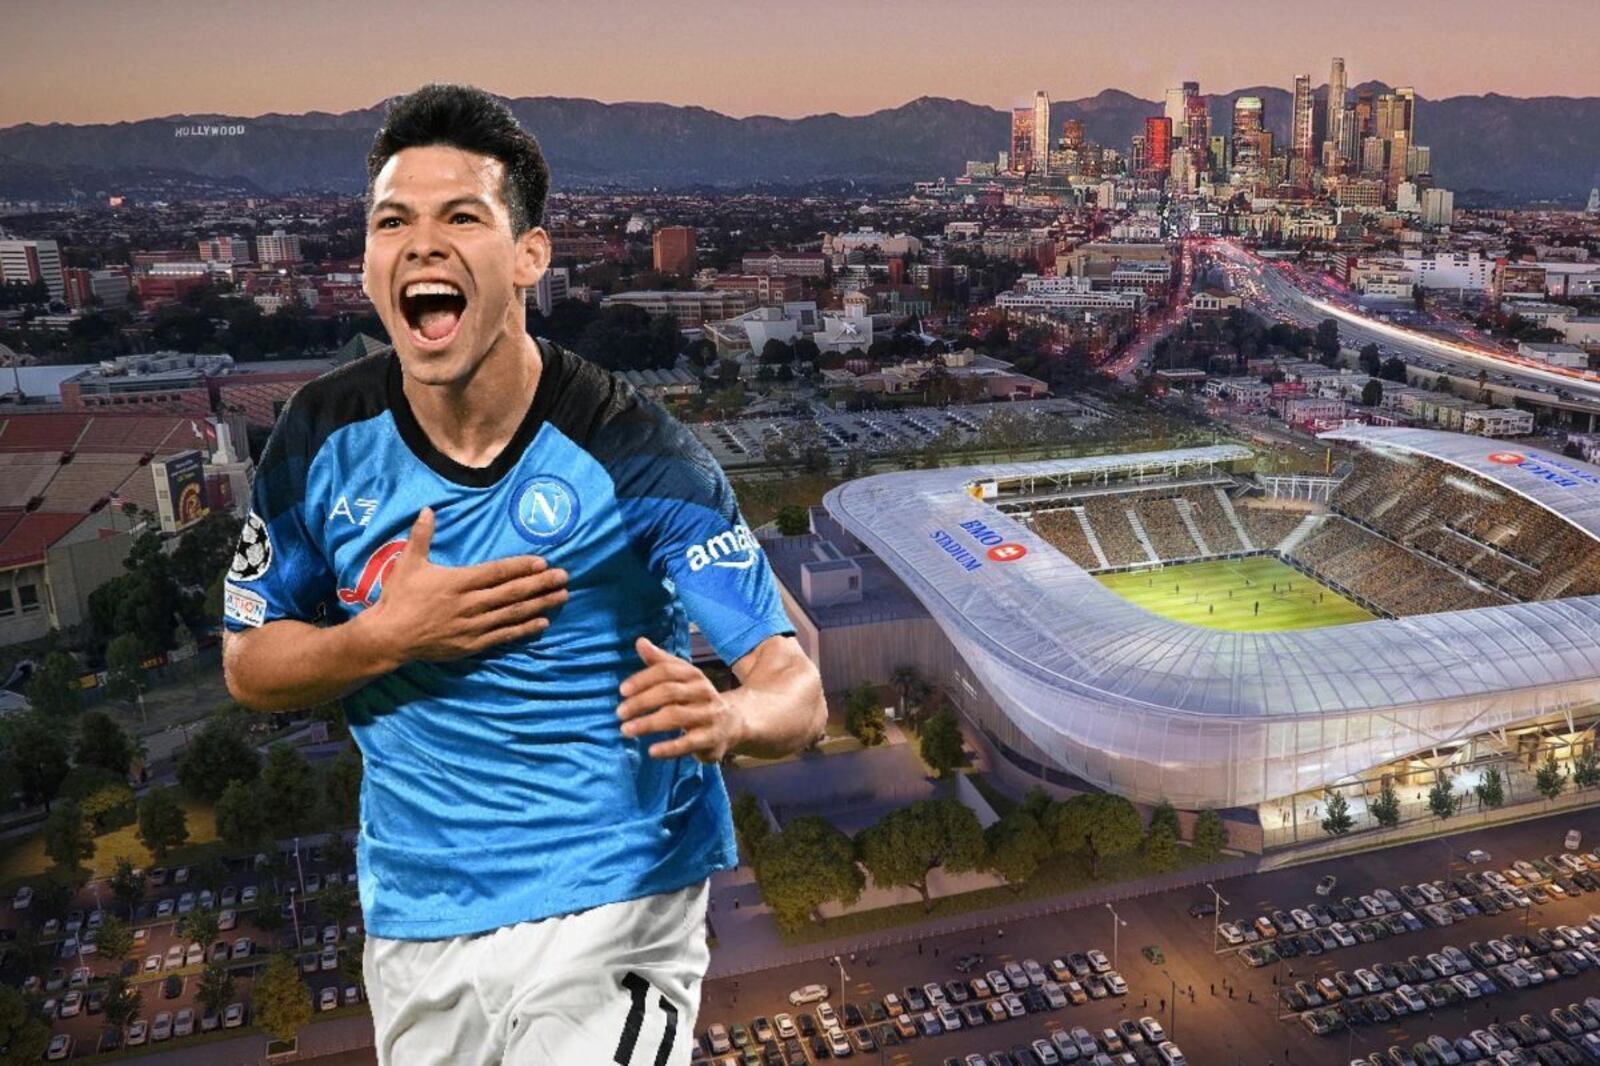 Welcome to the MLS Hirving Lozano, the Mexican will arrive at LAFC on this date